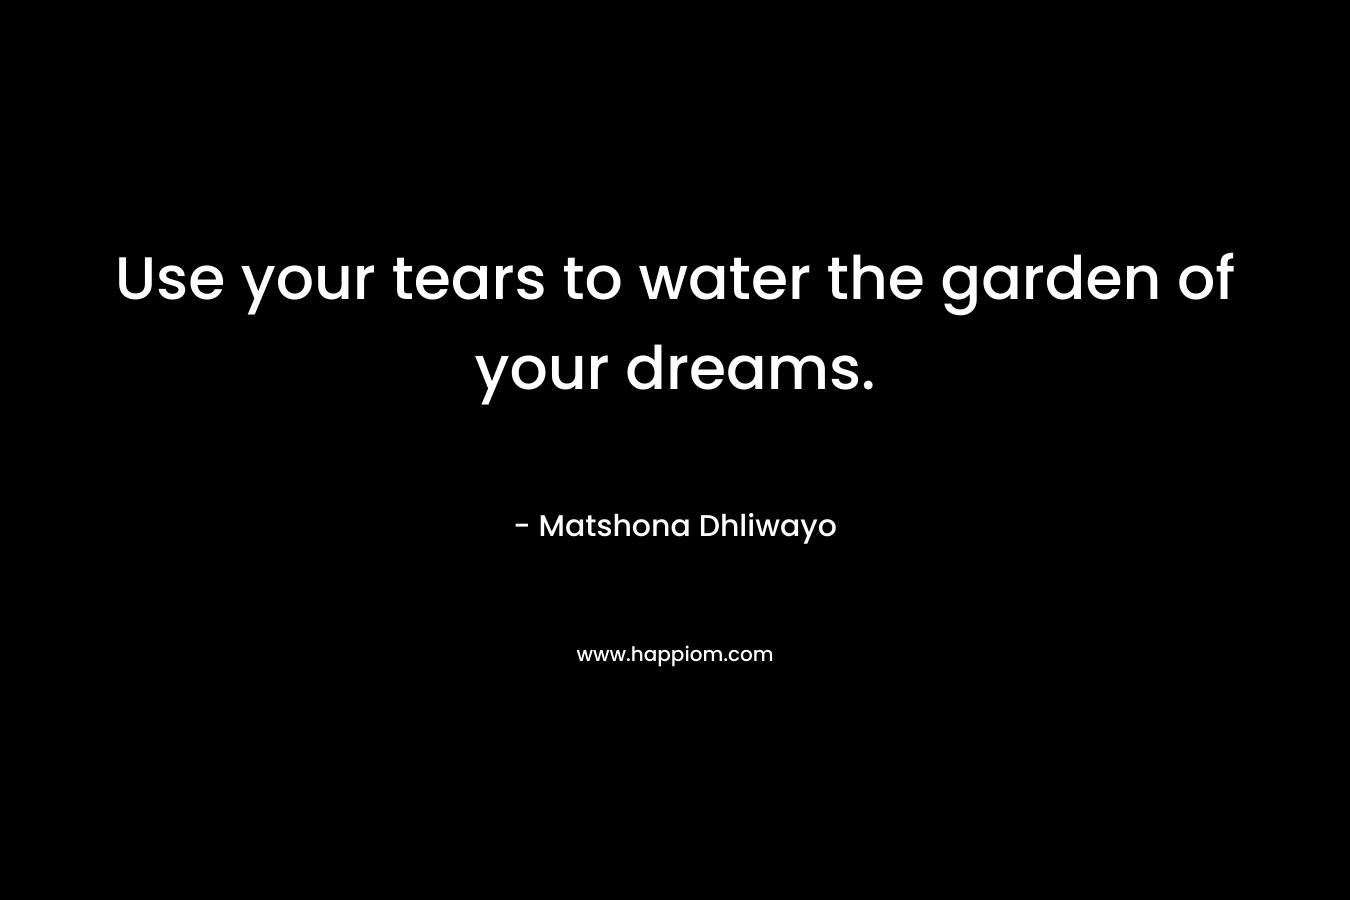 Use your tears to water the garden of your dreams.